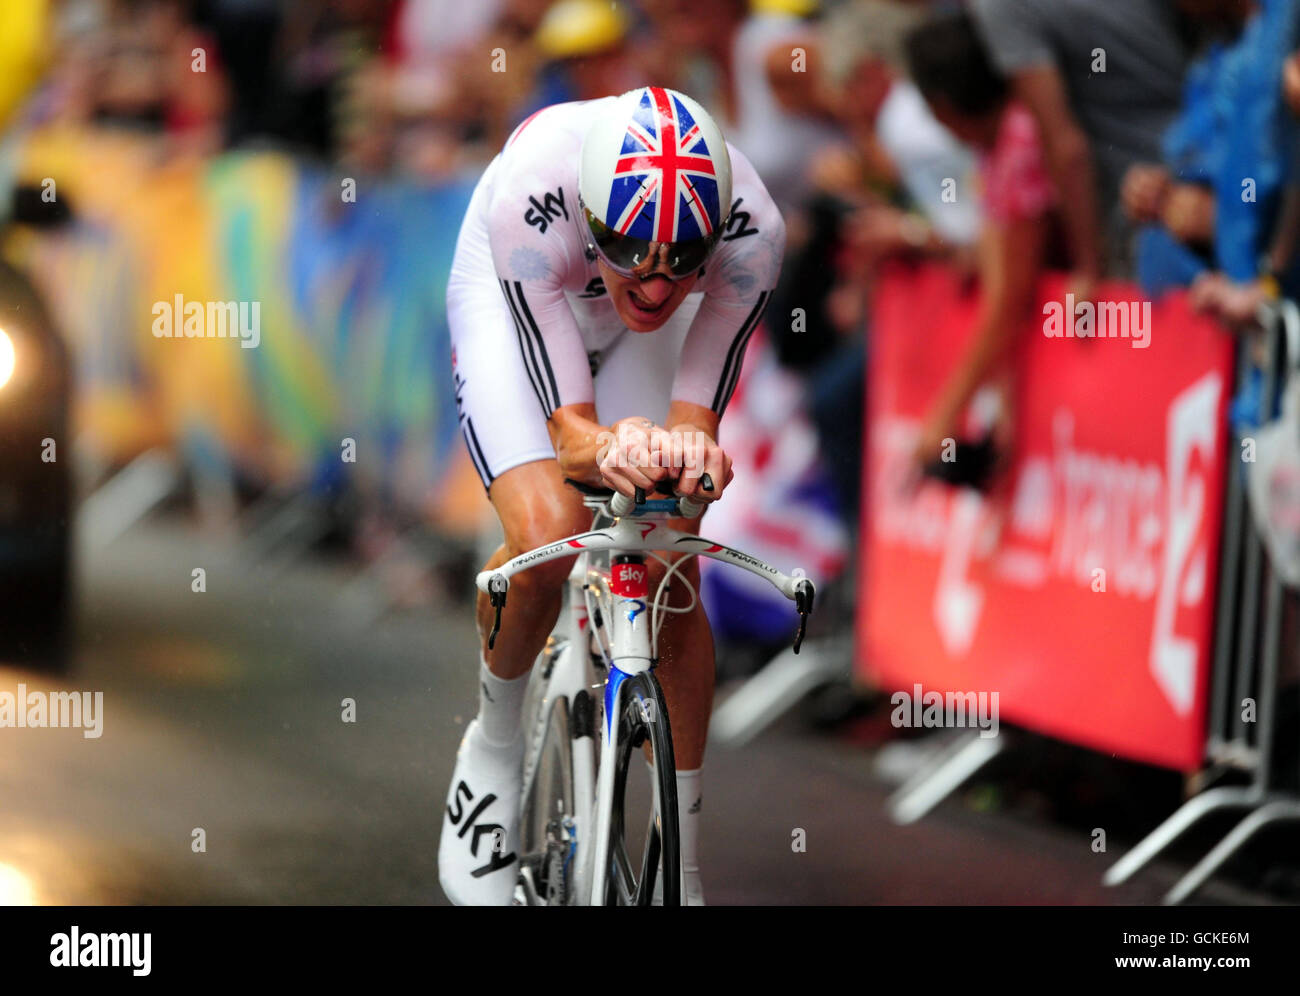 Team Sky's Bradley Wiggins from Great Britain during the Tour de France Preliminary Stage, Time Trial in Rotterdam, Netherlands. Stock Photo